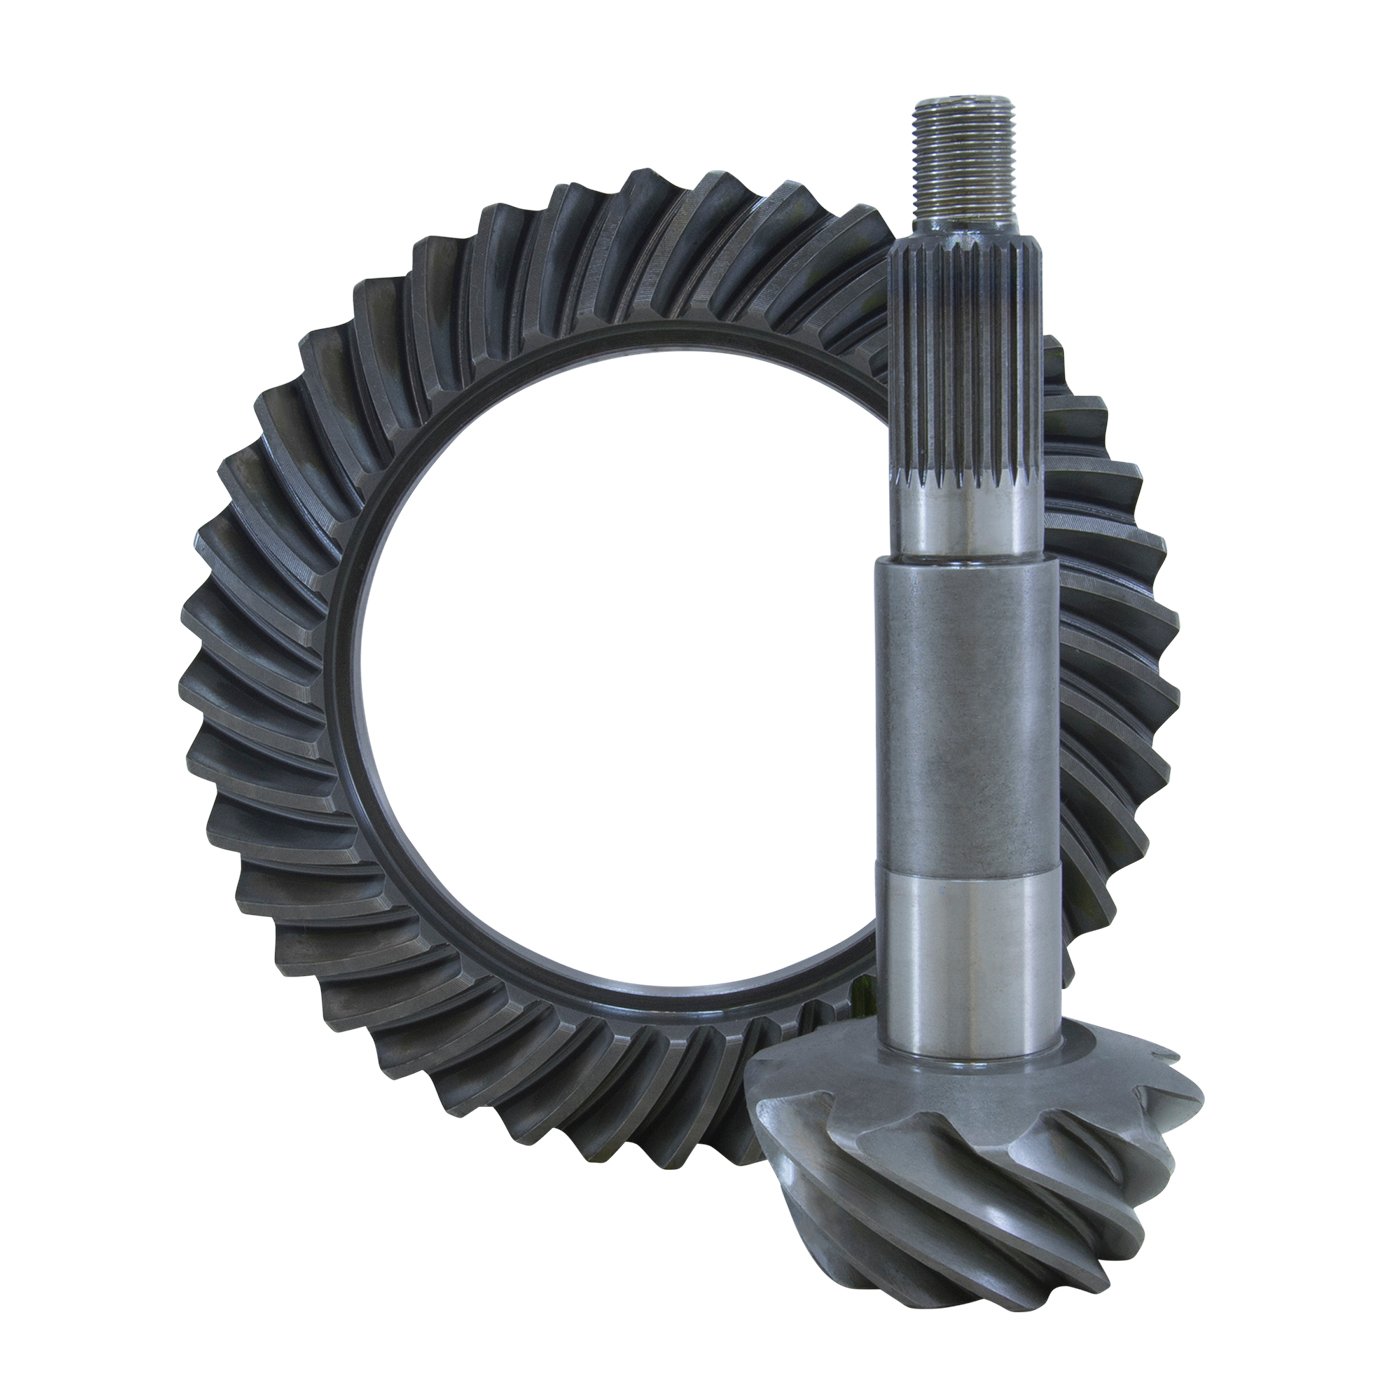 USA Standard ZG D44-488T Replacement Ring & Pinion in.Thick in. Gear Set, For Dana 44, 4.88 Ratio